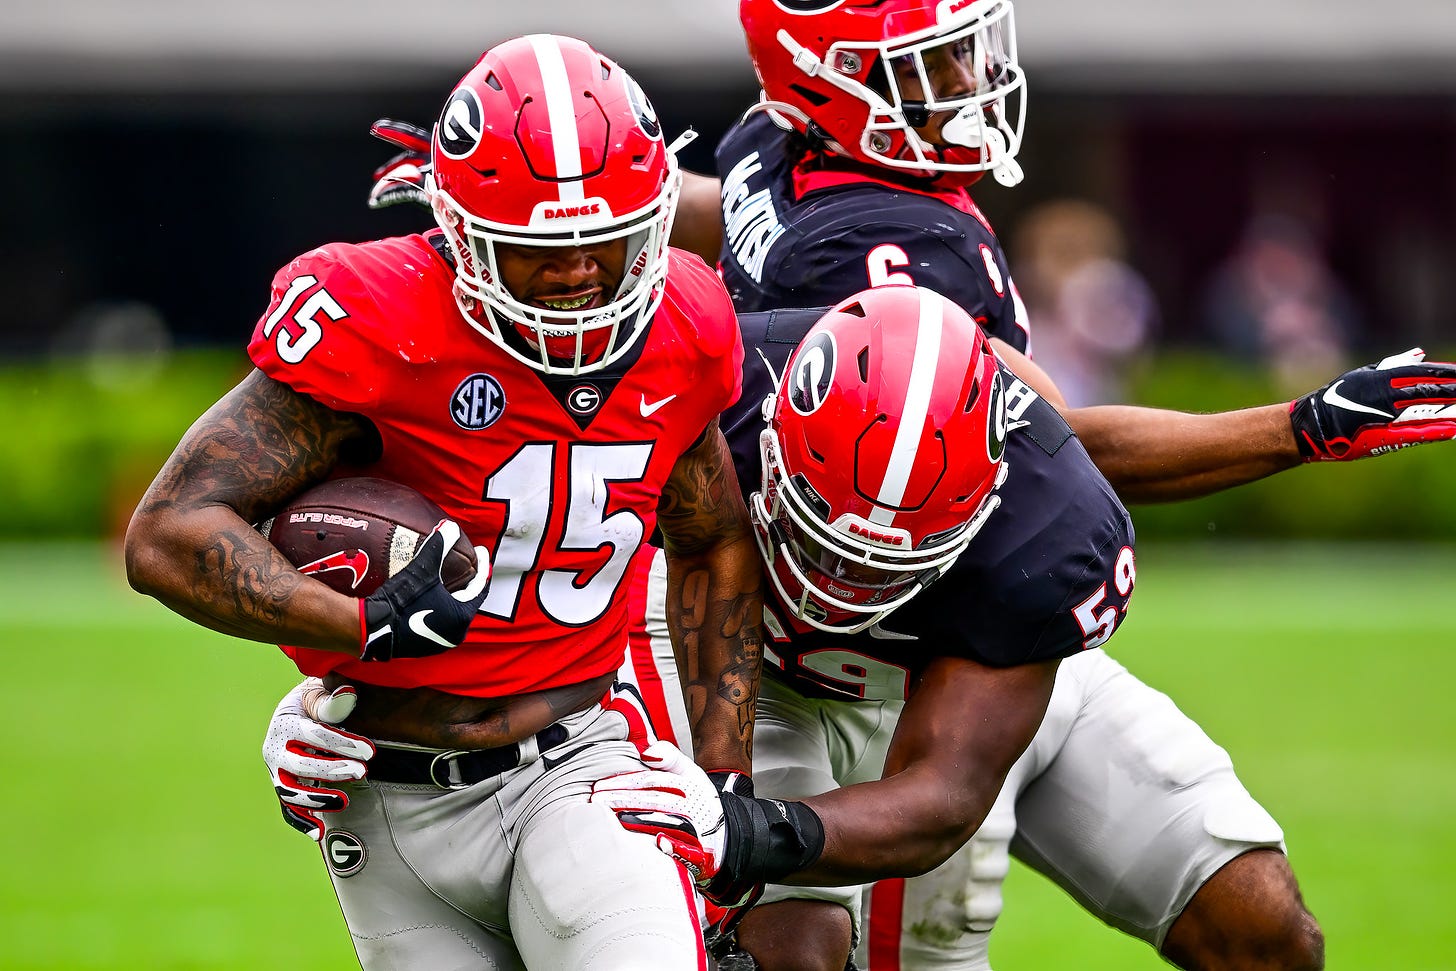 Georgia inside linebacker Trezmen Marshall (15) during the G-Day scrimmage on Dooley Field at Sanford Stadium in Athens, Ga., on Saturday, April 16, 2022. (Photo by Rob Davis)